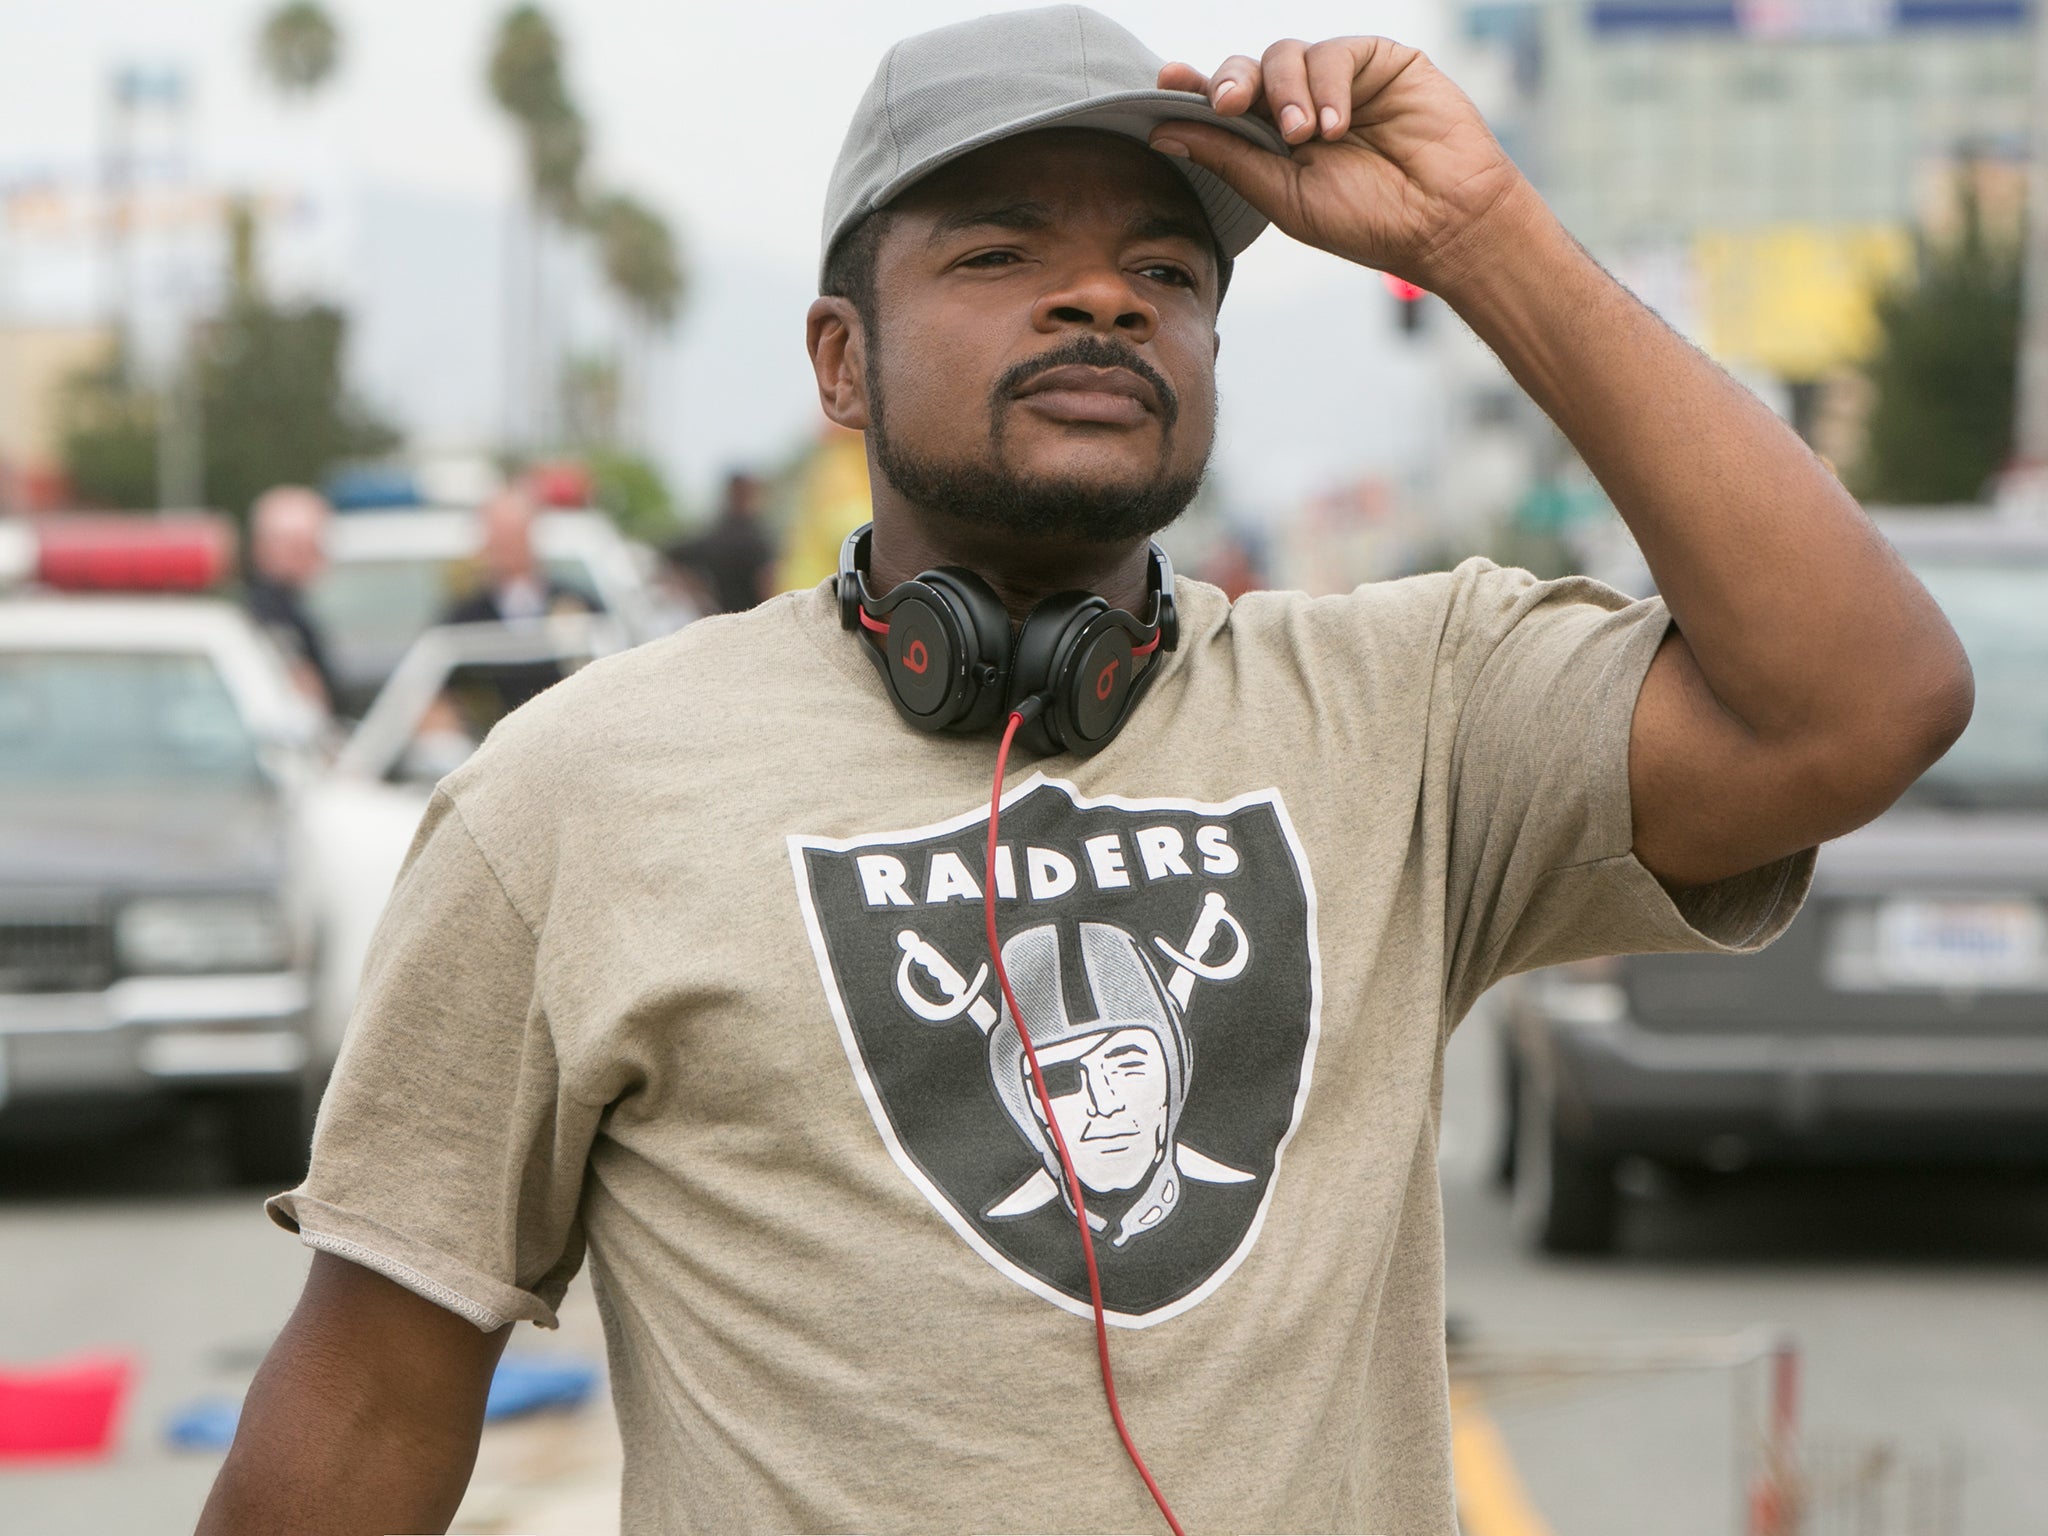 Straight Outta Compton: Director F Gary Gray on why he took the